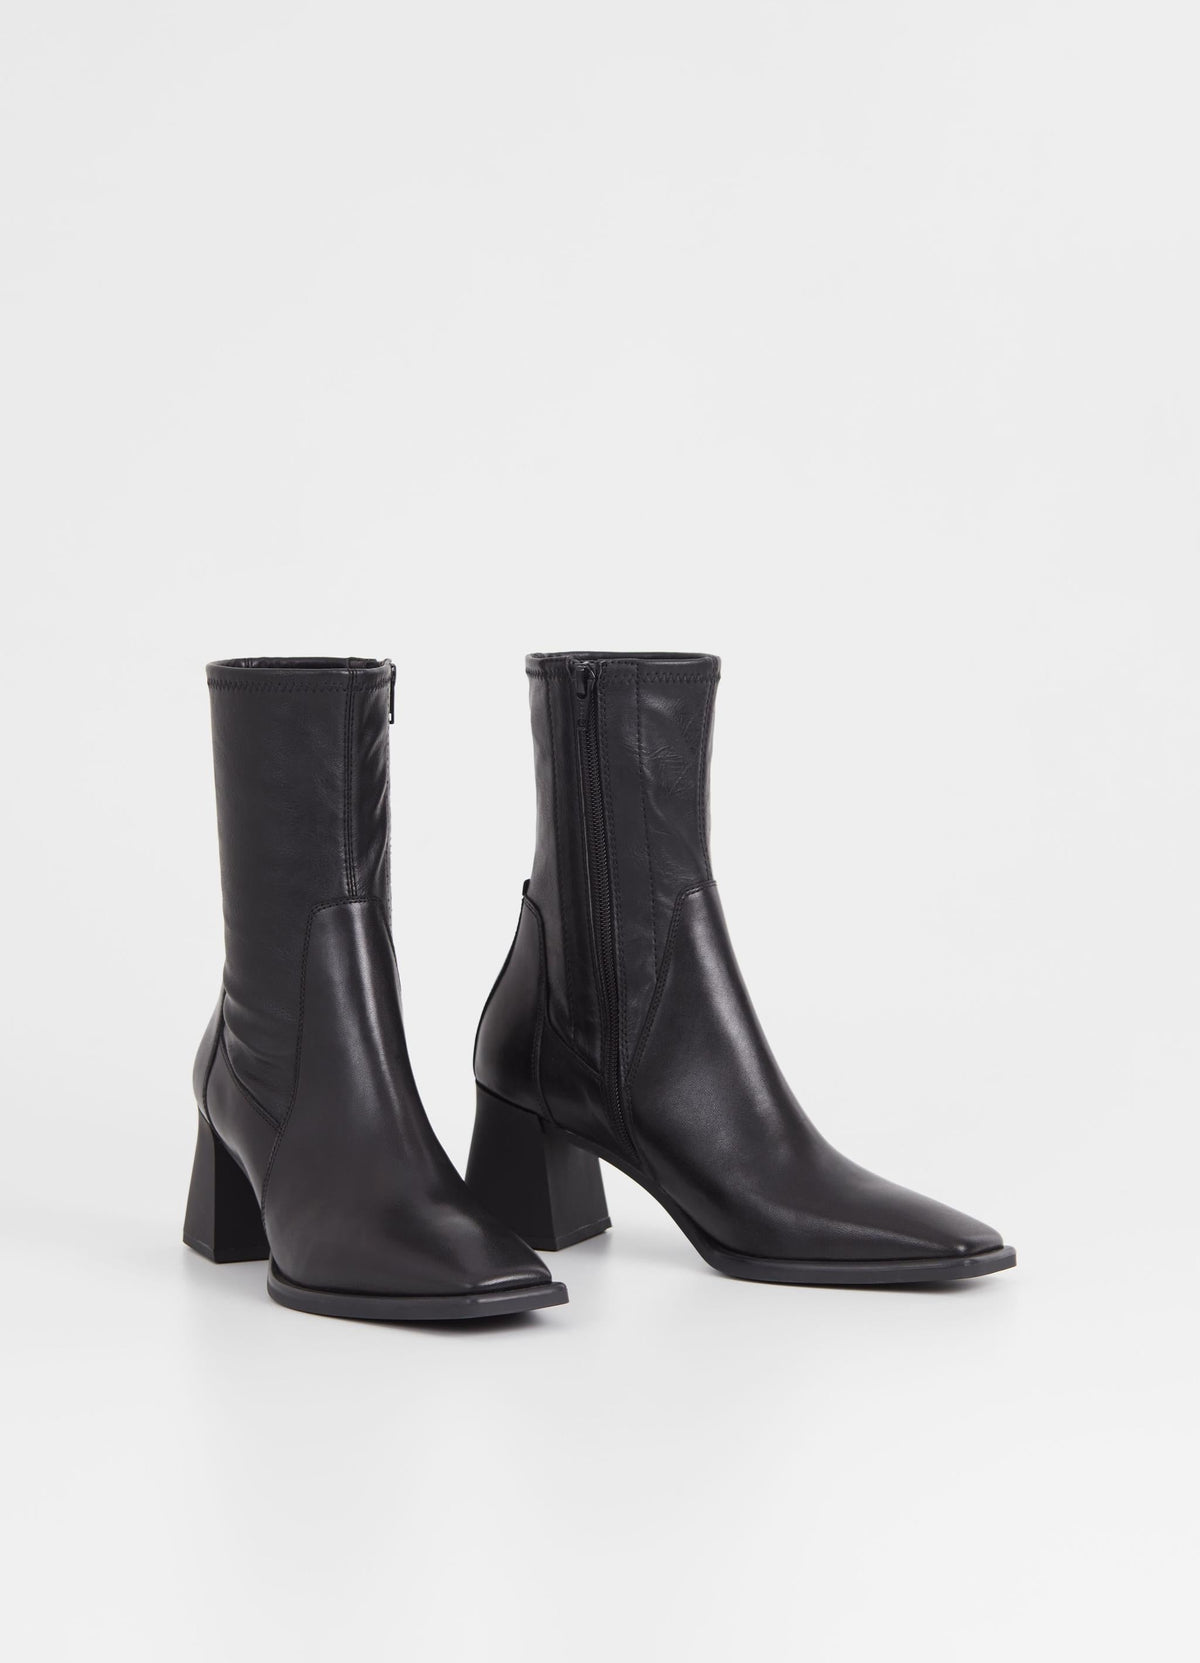 Mid-length inside zip black leather boot with flared block rubber heel and rounded square toe